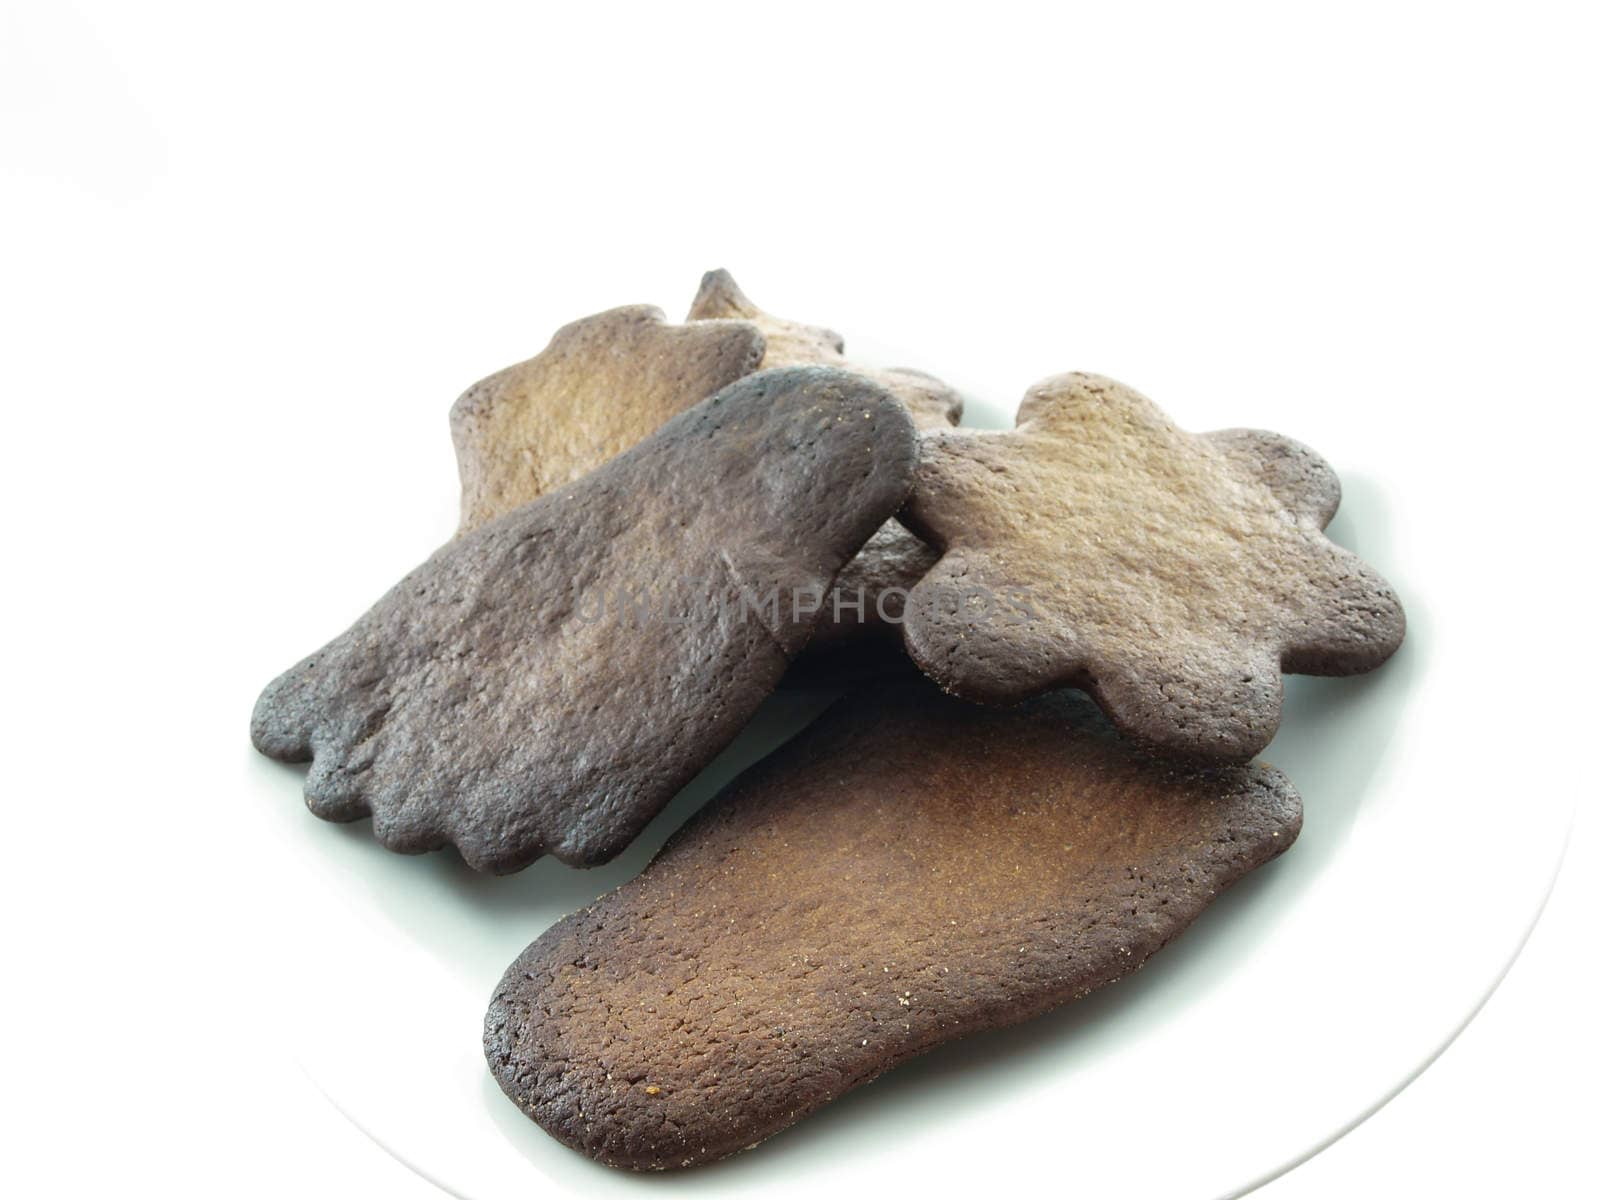 Burned gingerbread cookies on white plate towards white background